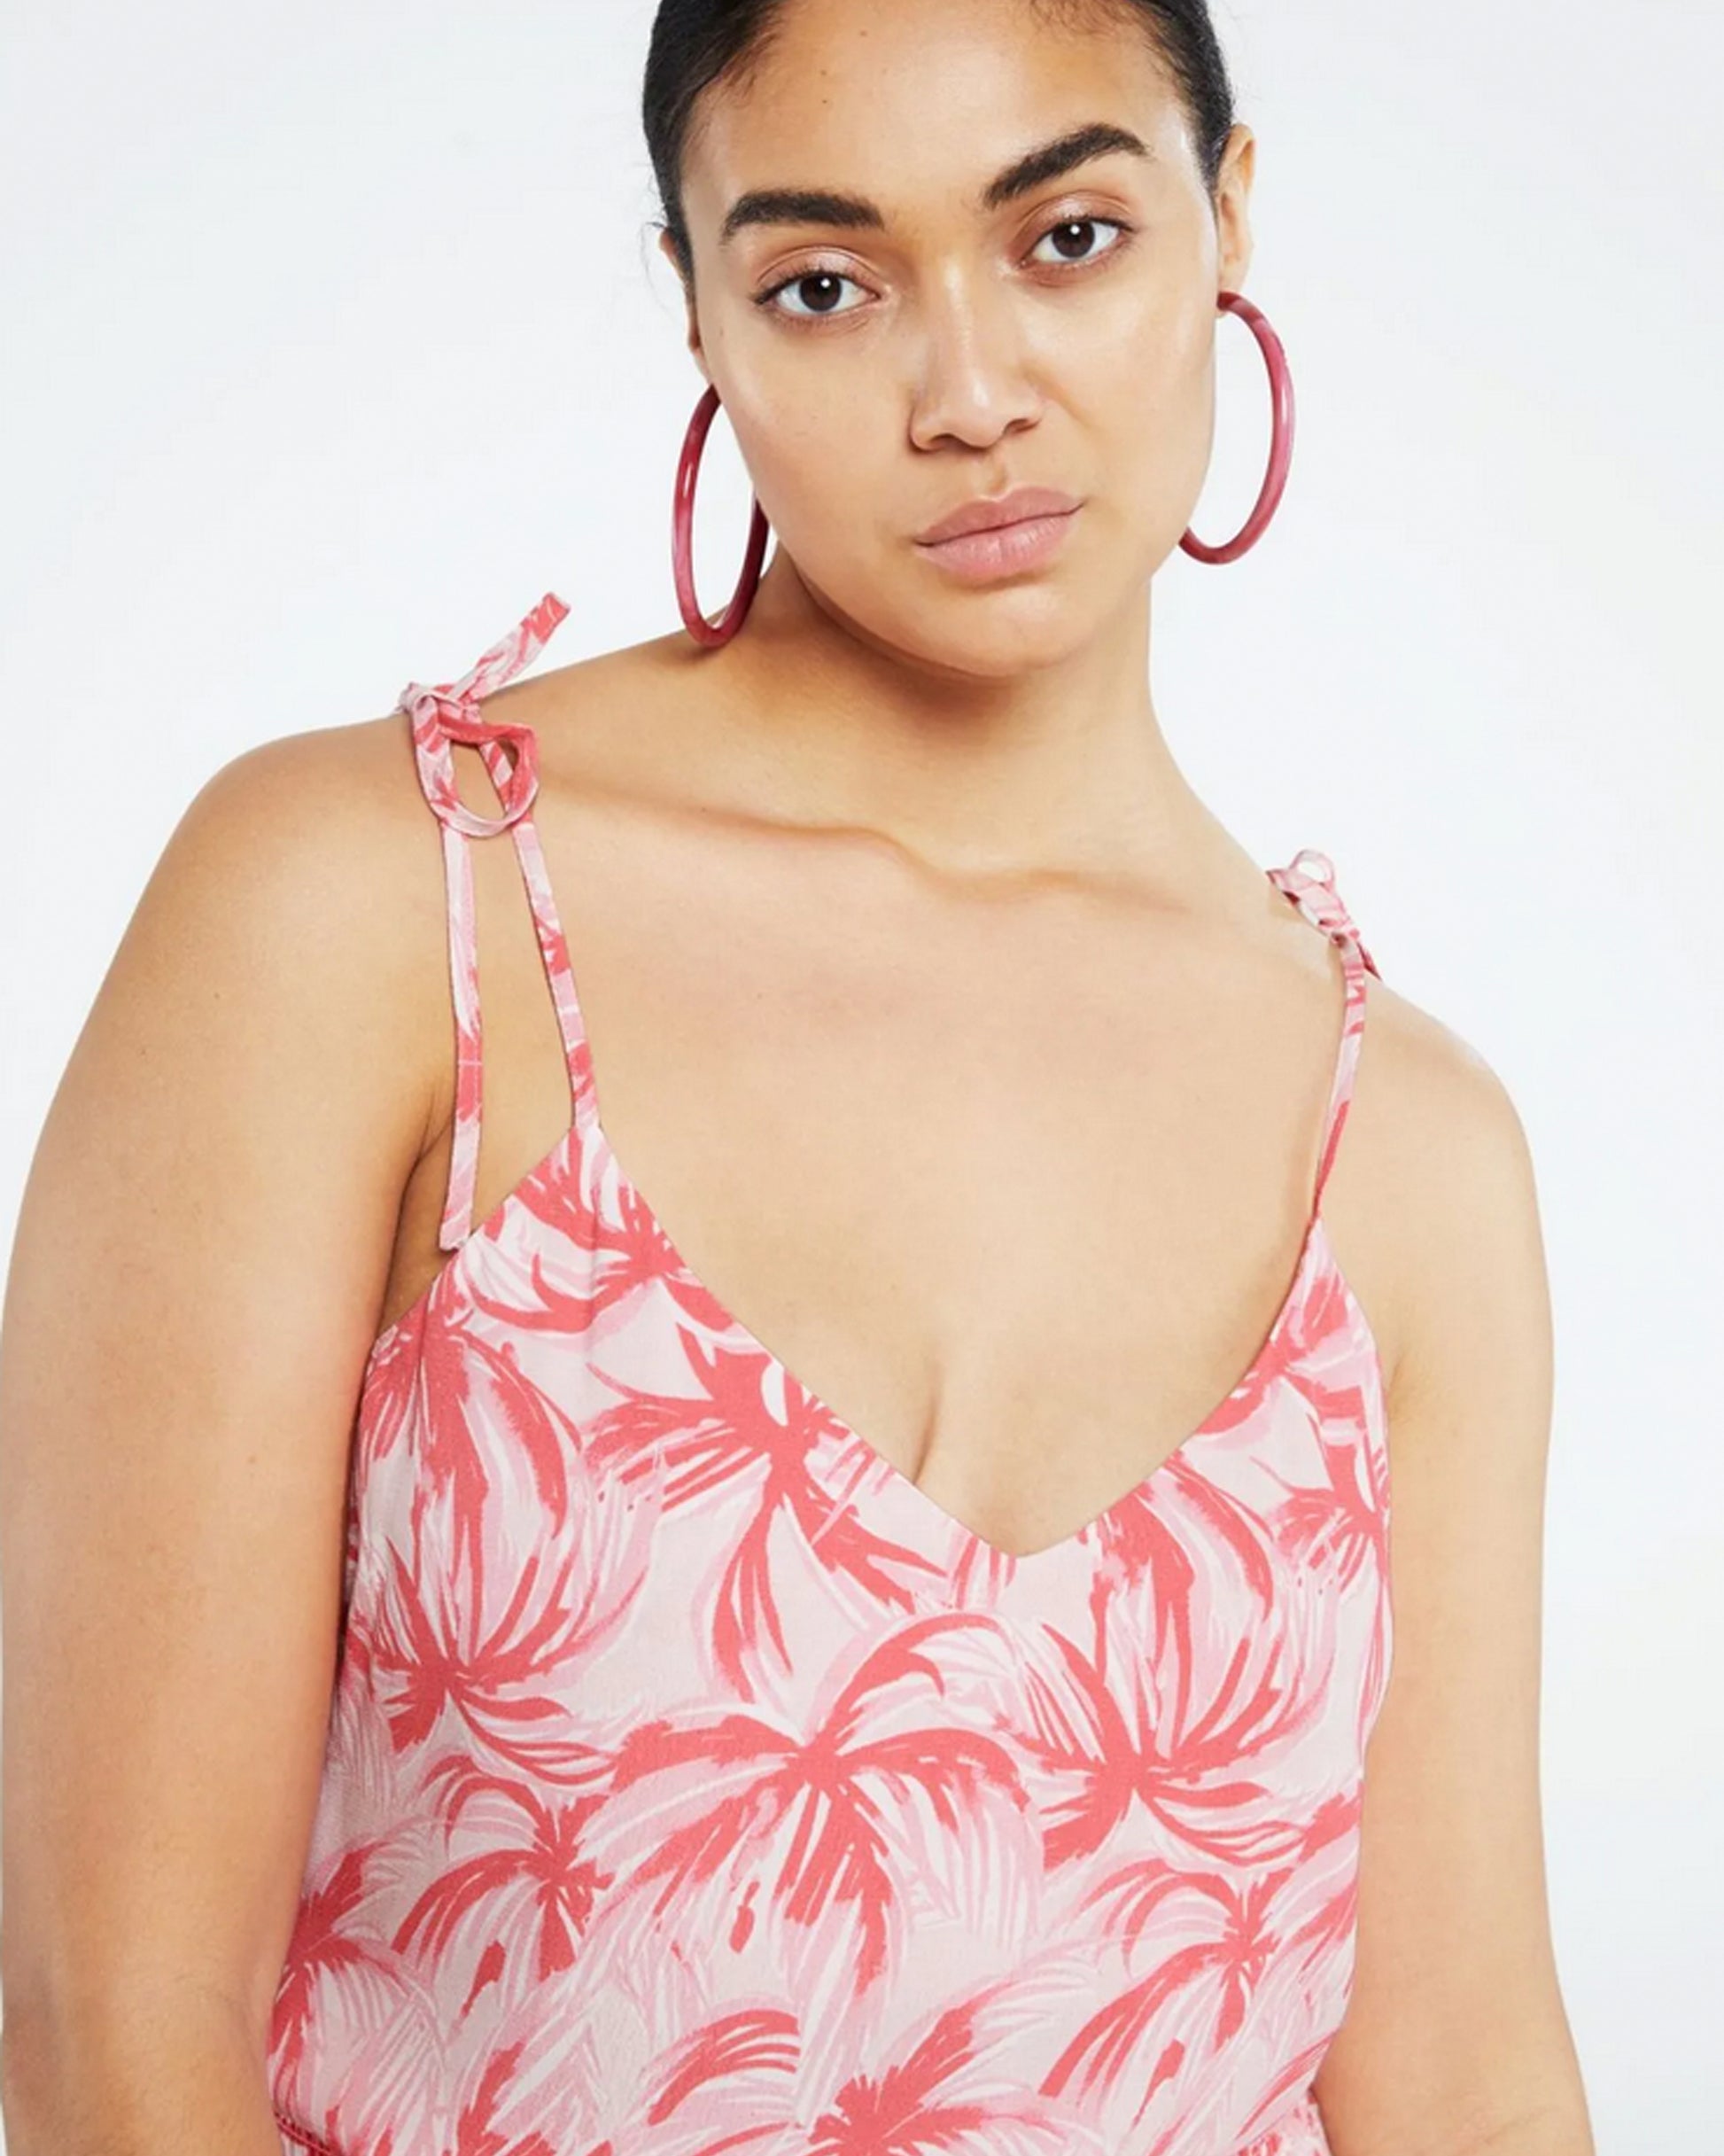 The model is wearing a sustainable fabric Eline top - Palmeraie Mini with a pink palm print by Fabienne Chapot.